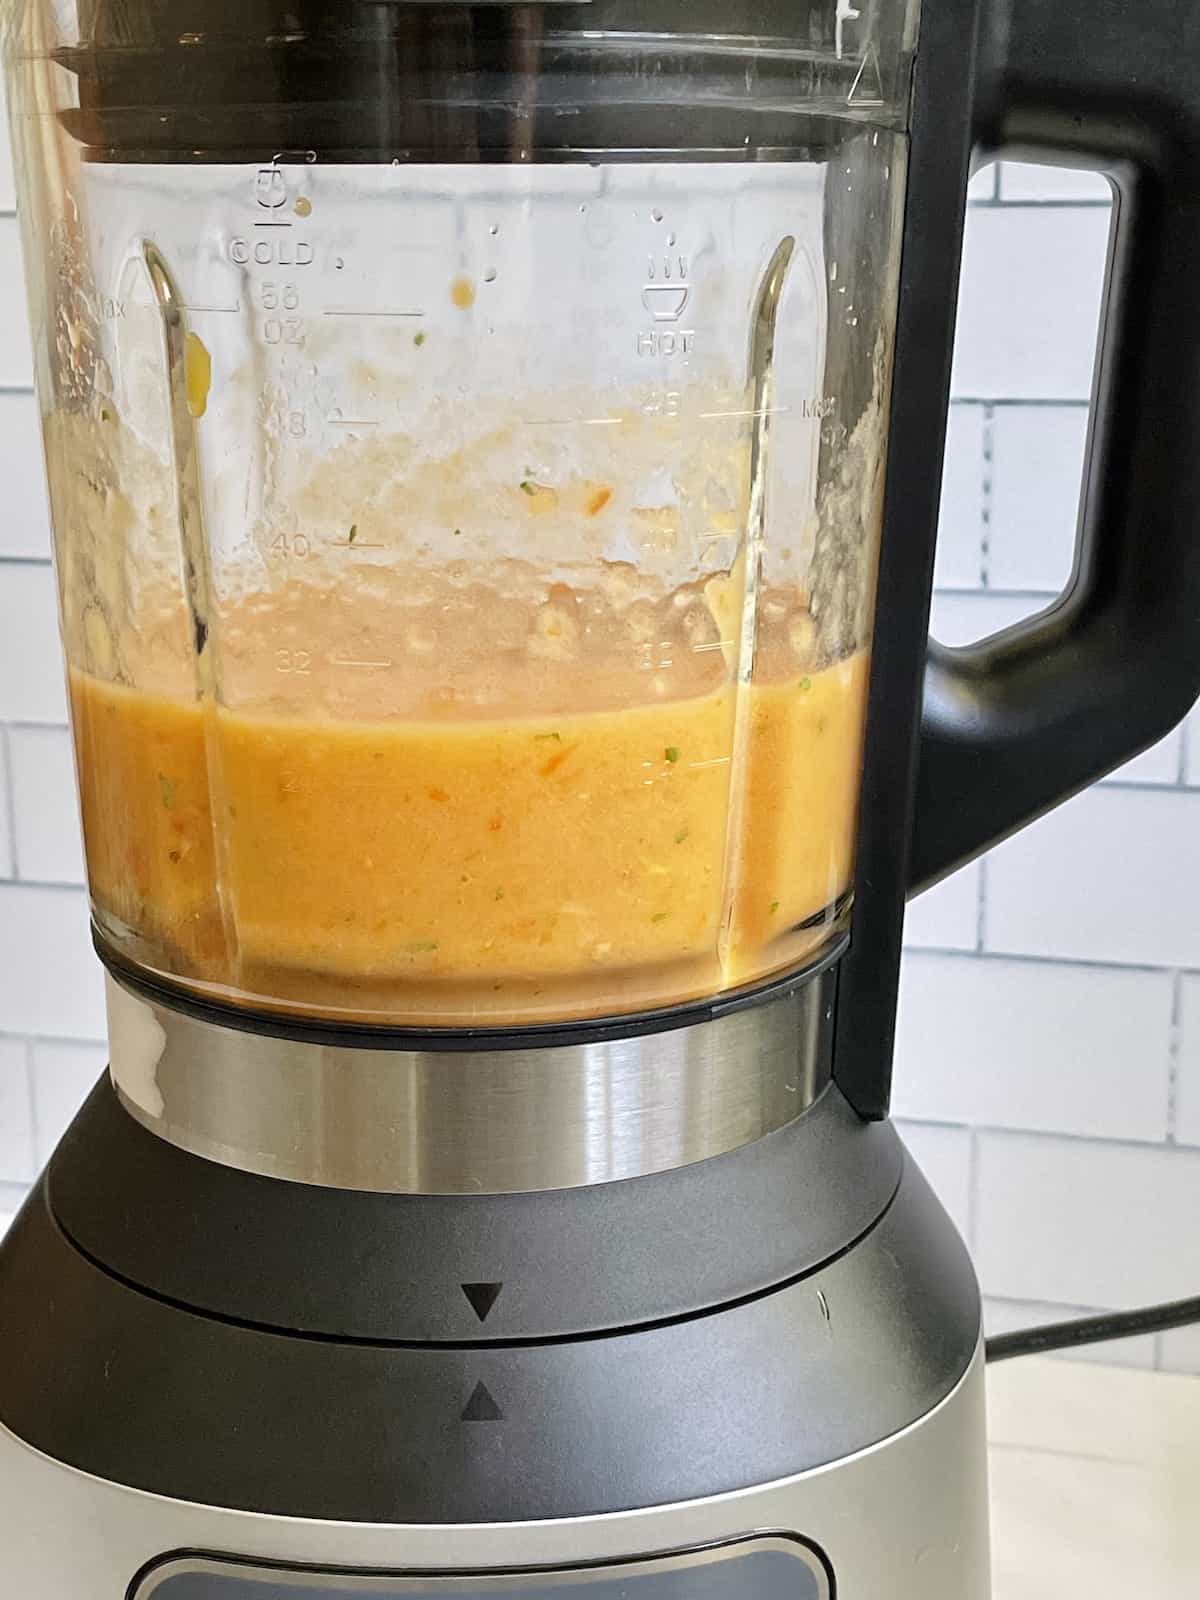 blended mango, tomato, habanero, onion, garlic in an Instant Pot cooking blender